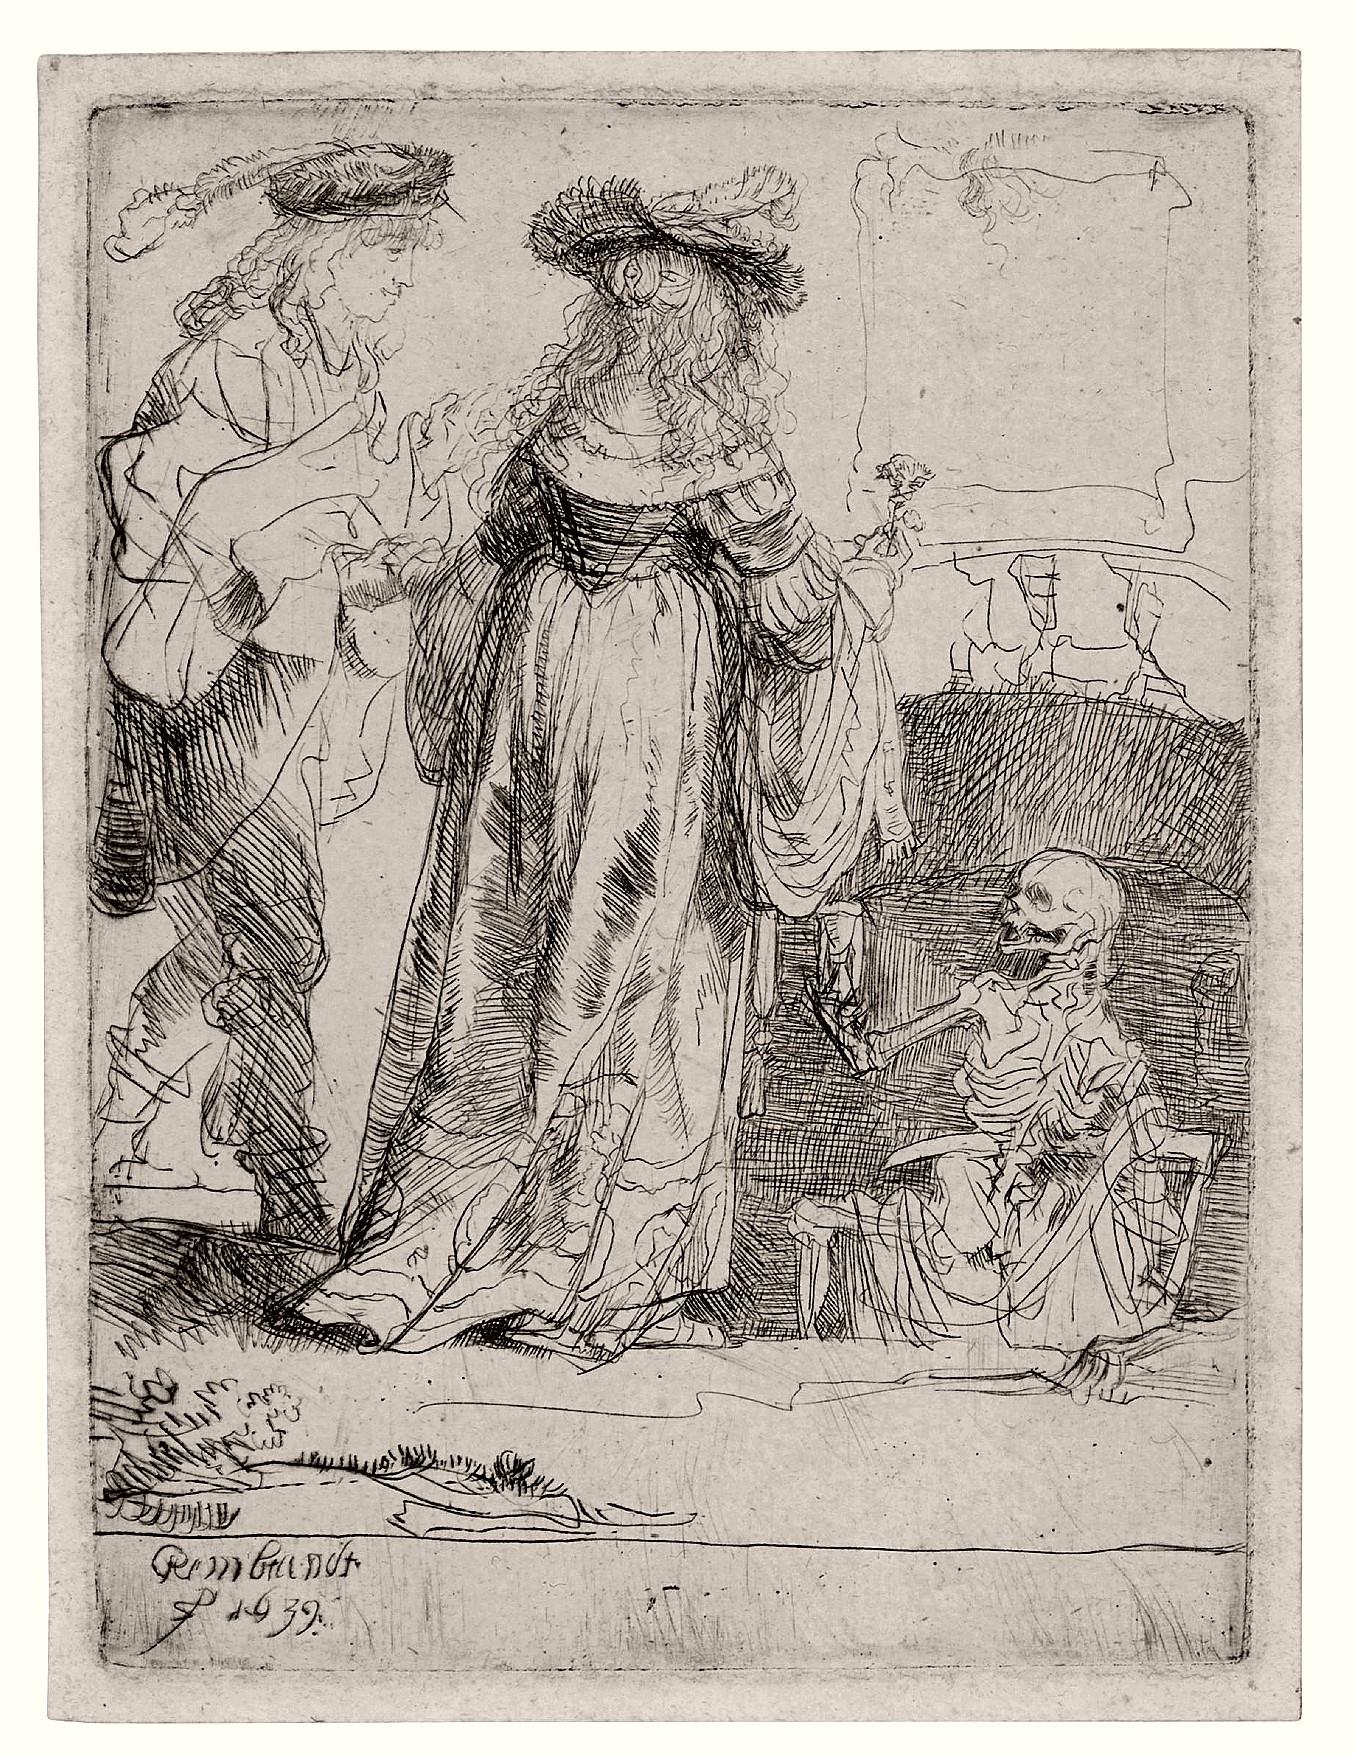 Death Appearing to a Wedded Couple from an Open Grave - Print by Rembrandt van Rijn